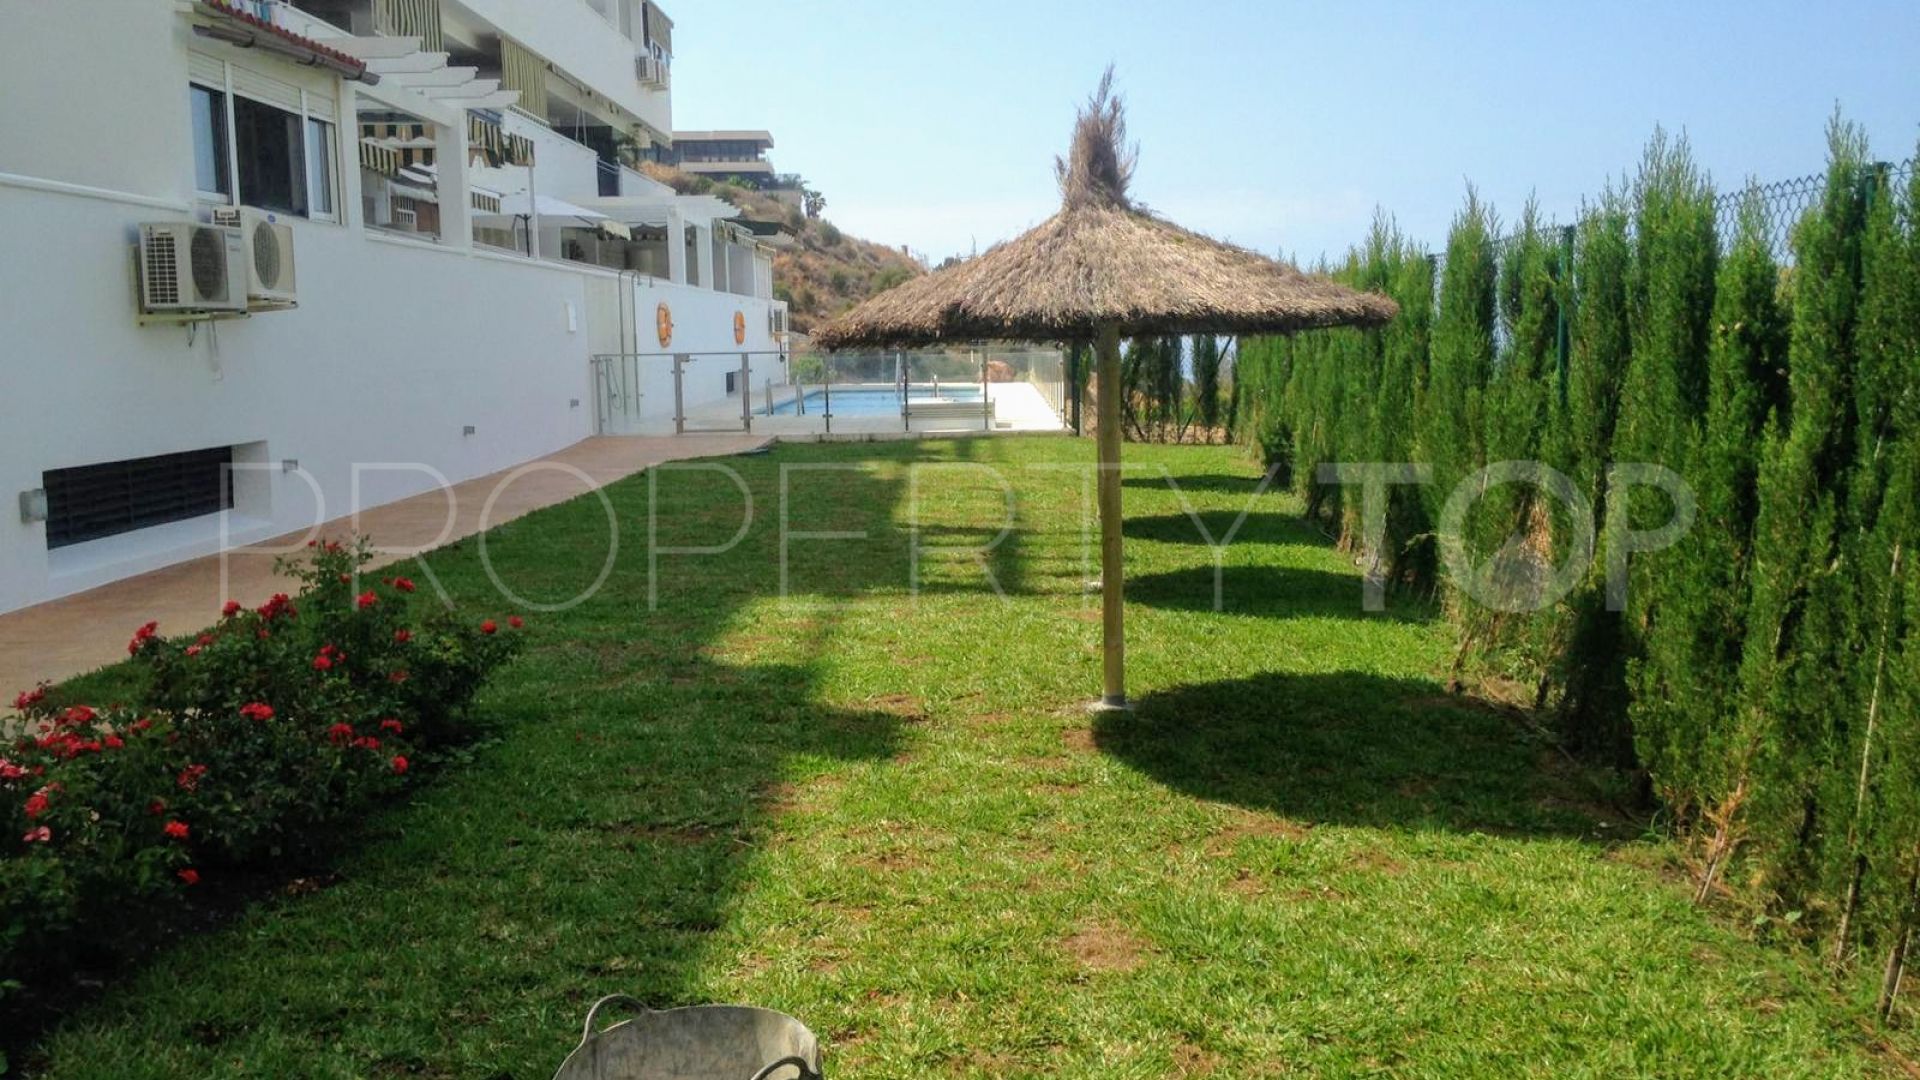 Apartment for sale in Torrequebrada with 1 bedroom